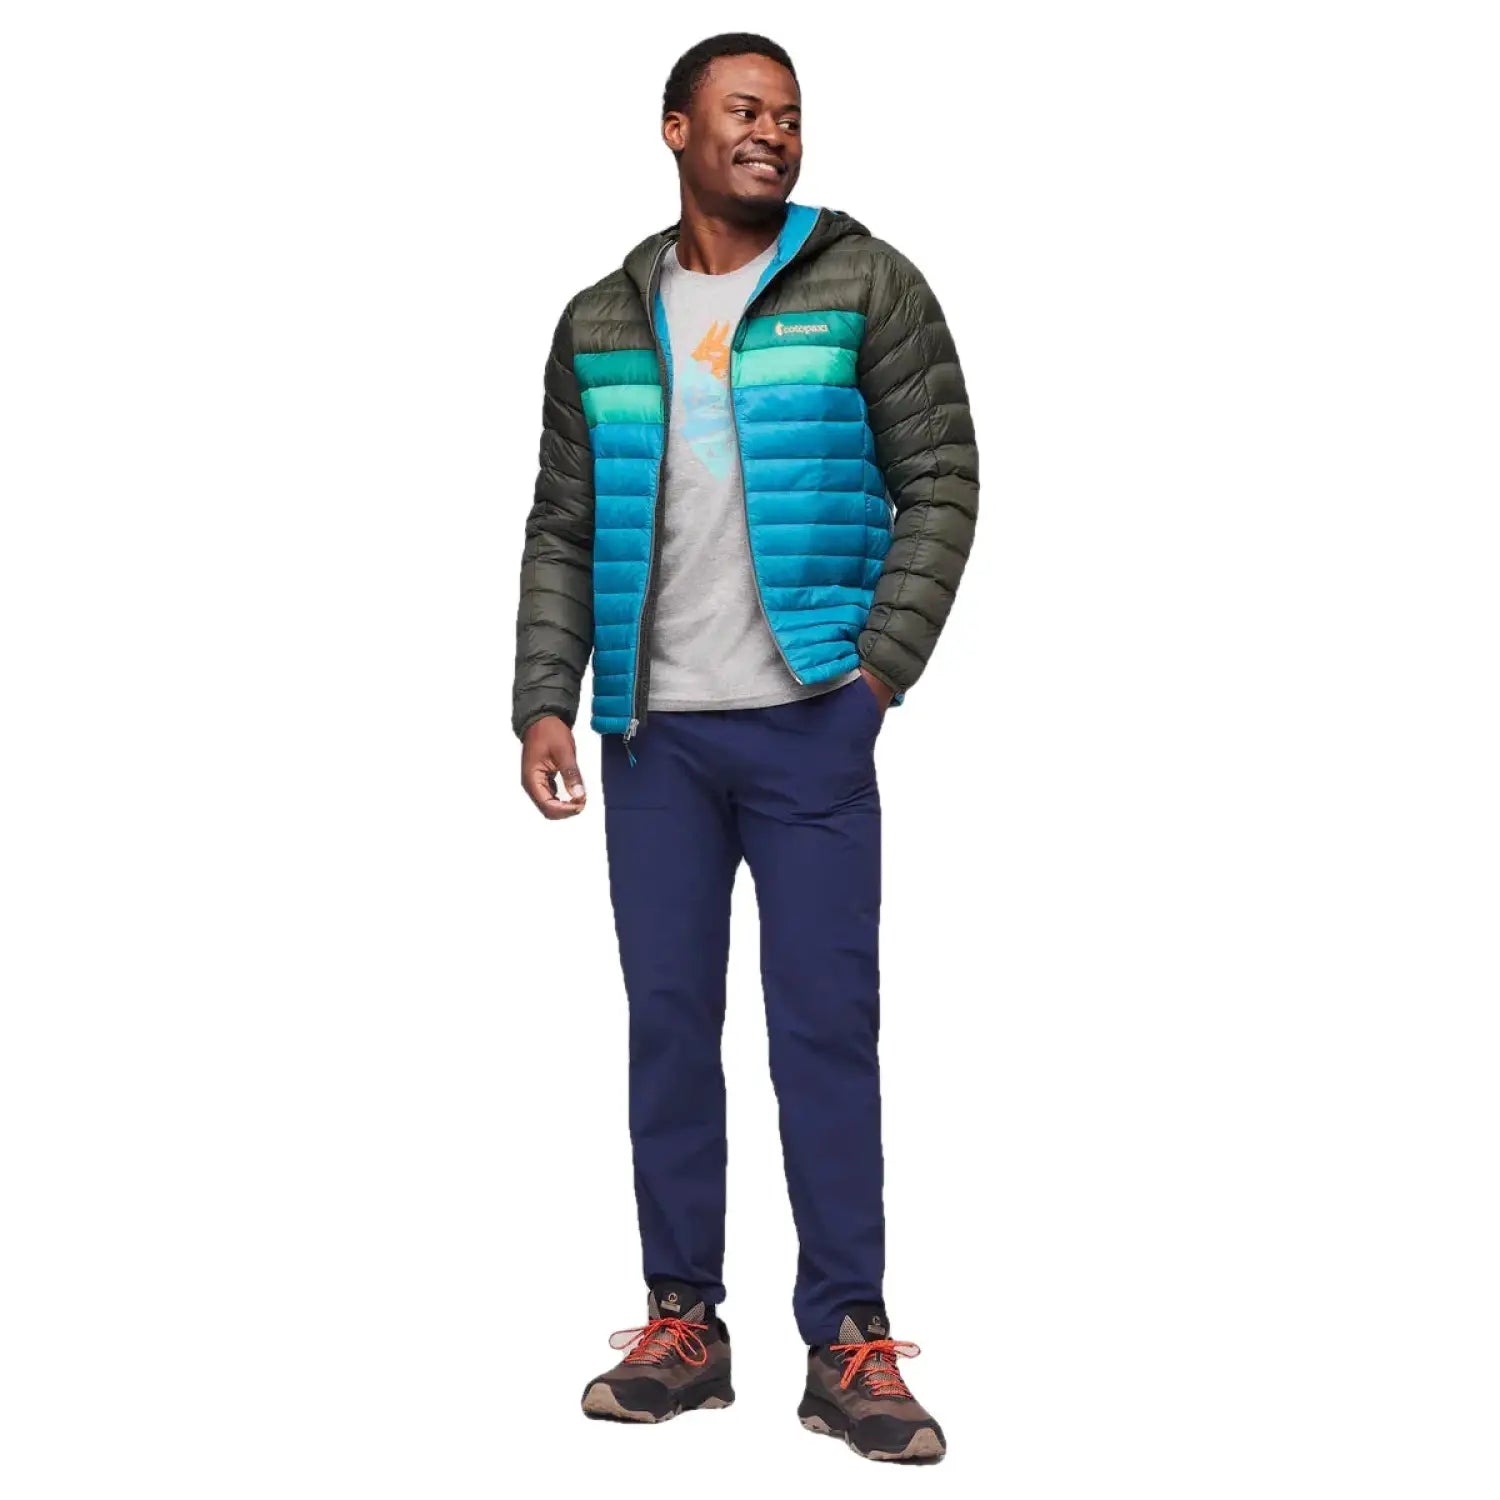 Cotopaxi M's Fuego Hooded Down Jacket, Woods Gulf, front view on model jacket unzipped 